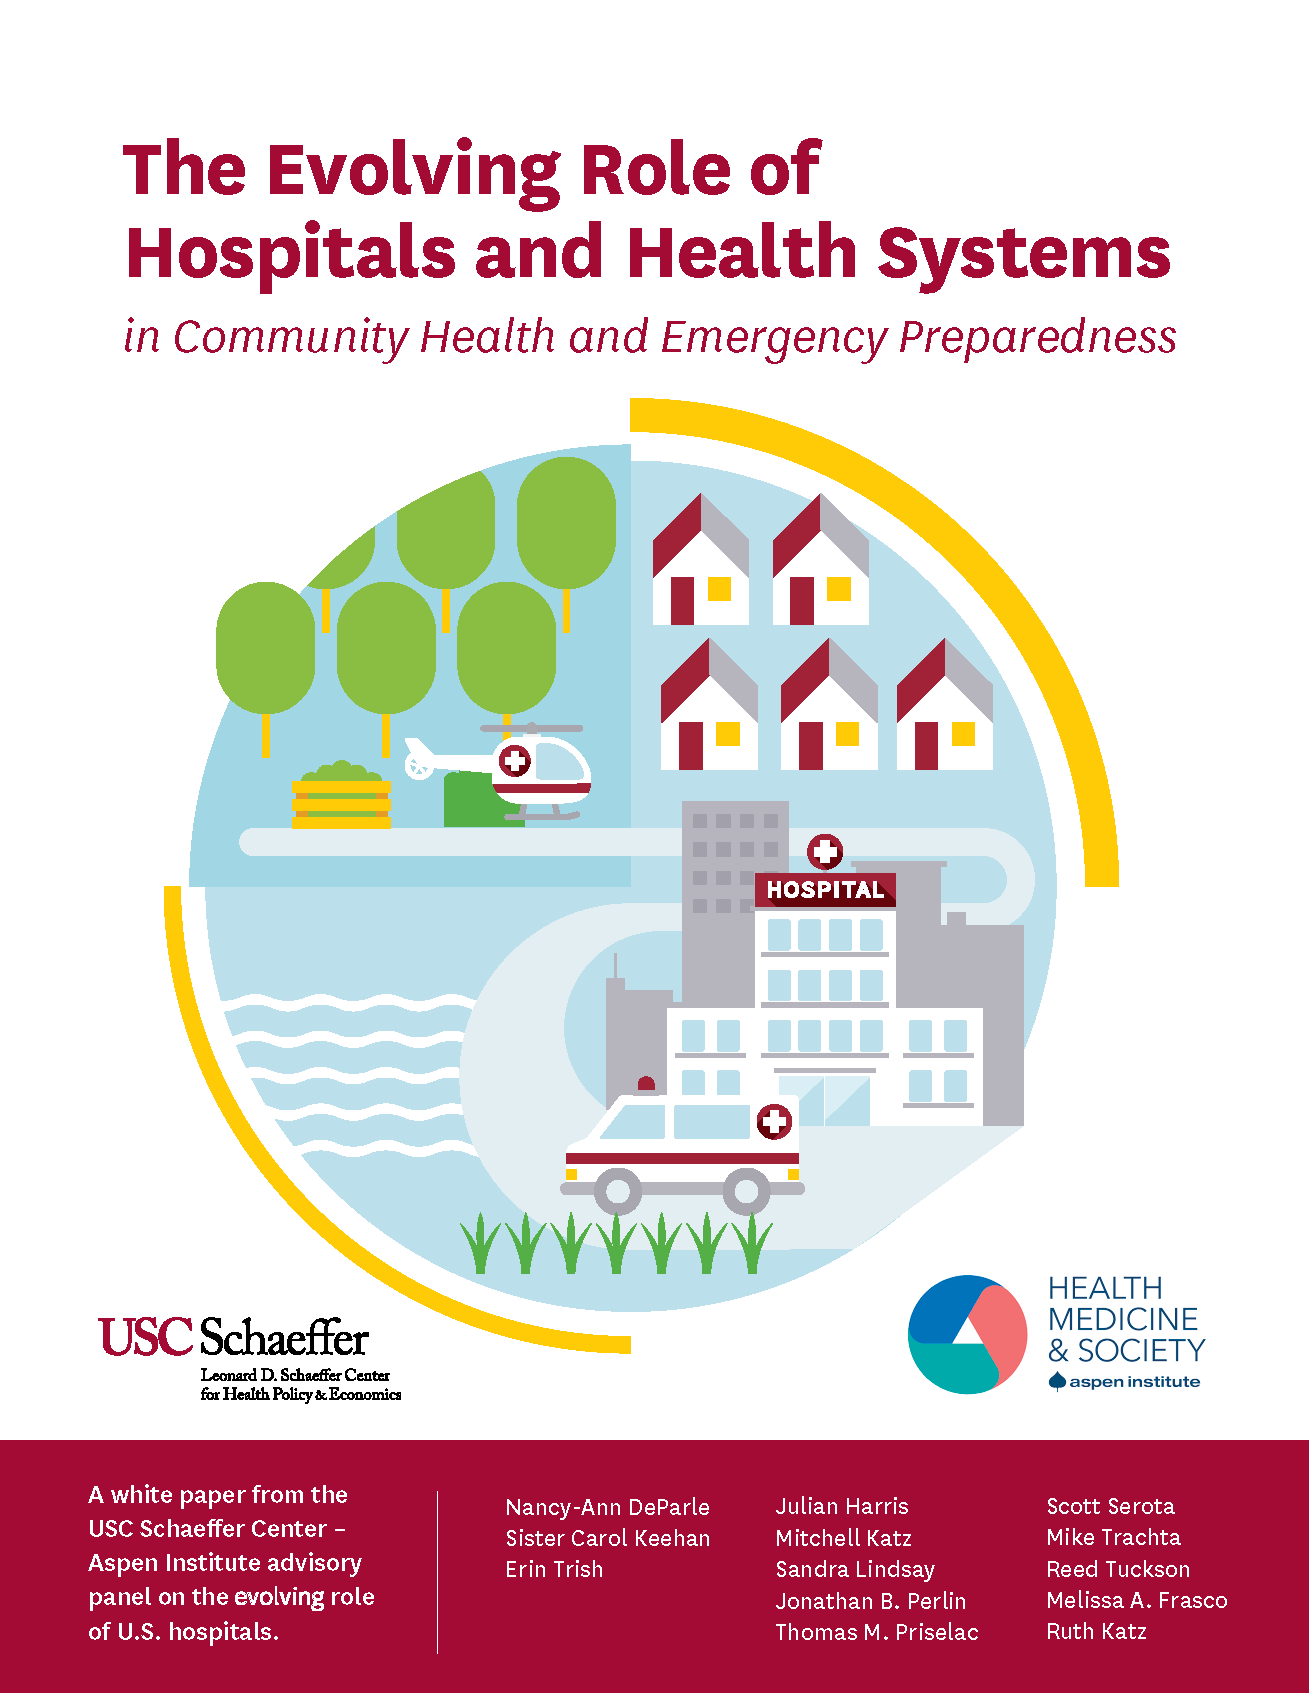 The Evolving Role of Hospitals and Health Systems in Community Health and Emergency Preparedness